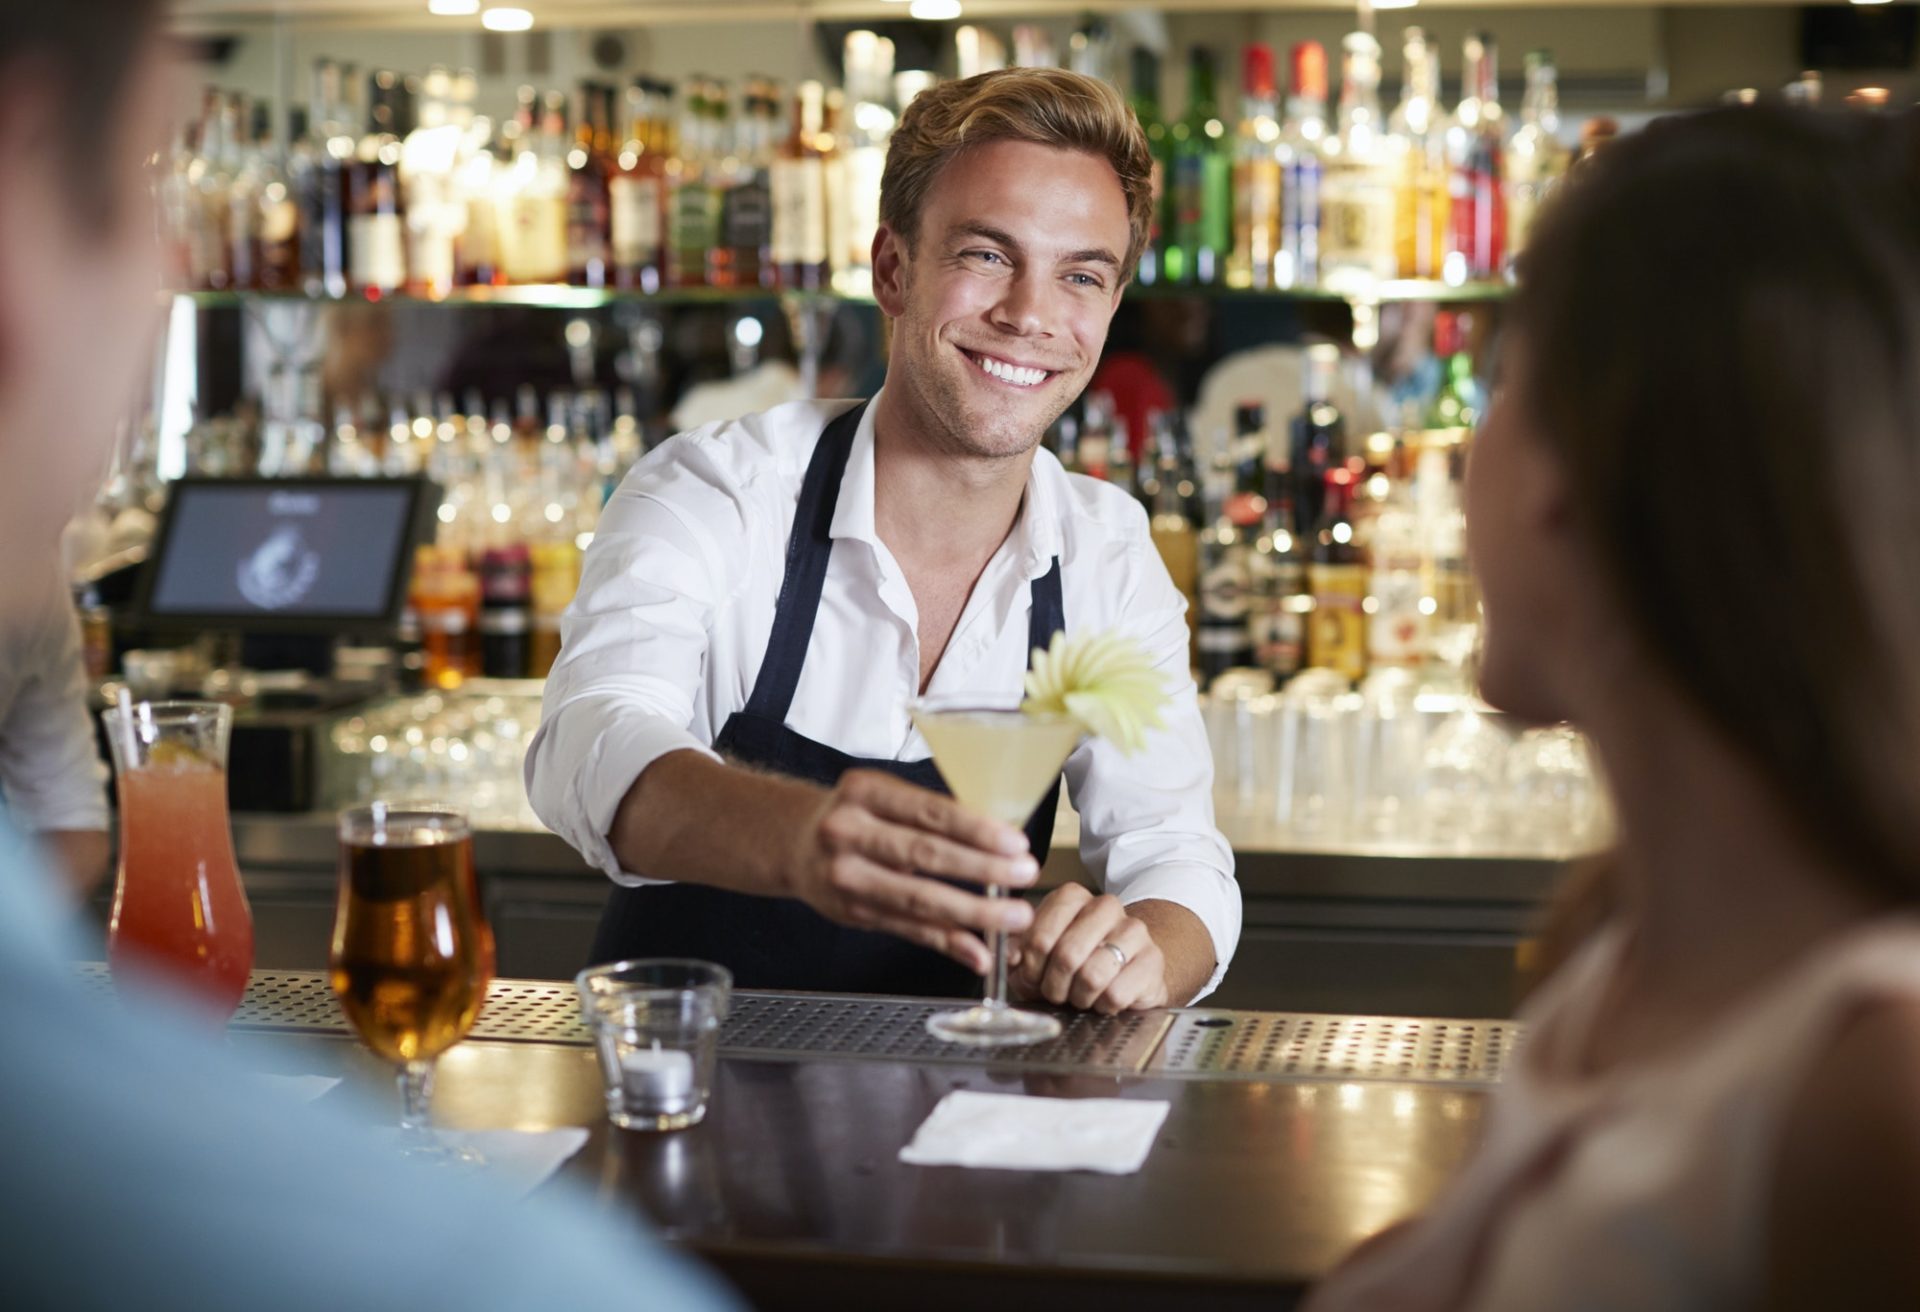 Barman Serving Cocktail To Female Customer In Bar